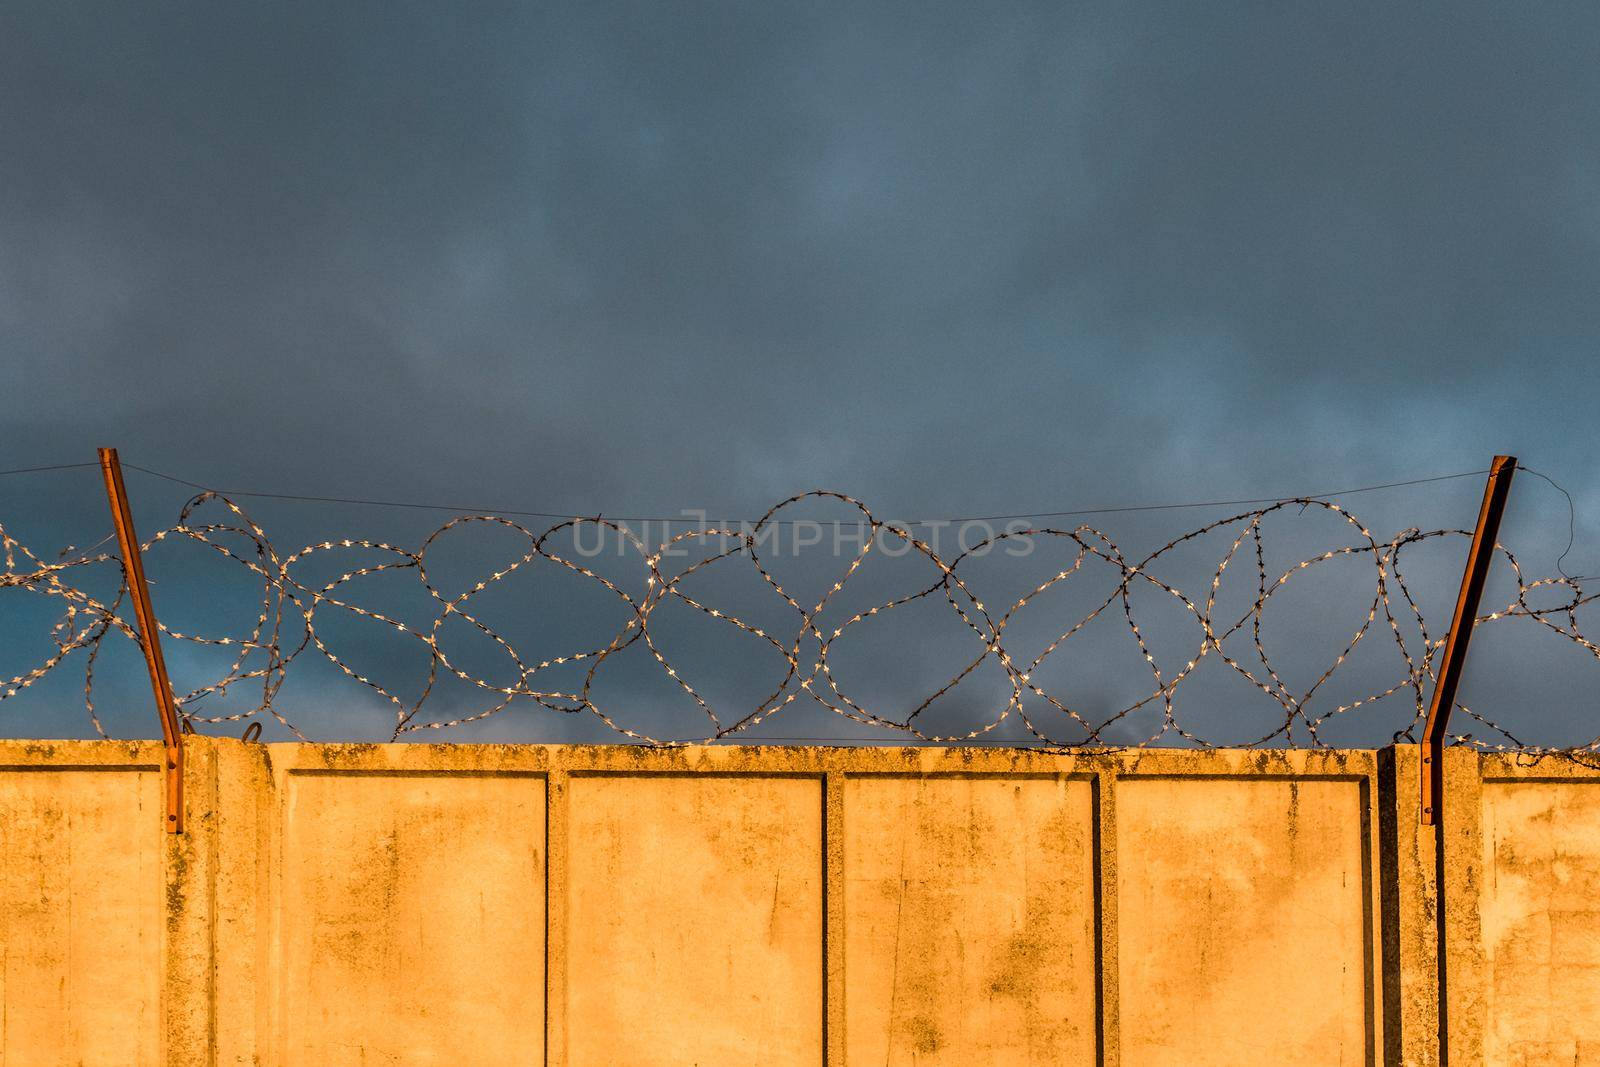 Barbed metal wire fence with concrete fence of a prison or closed object against a cloudy blue sky and sunset.